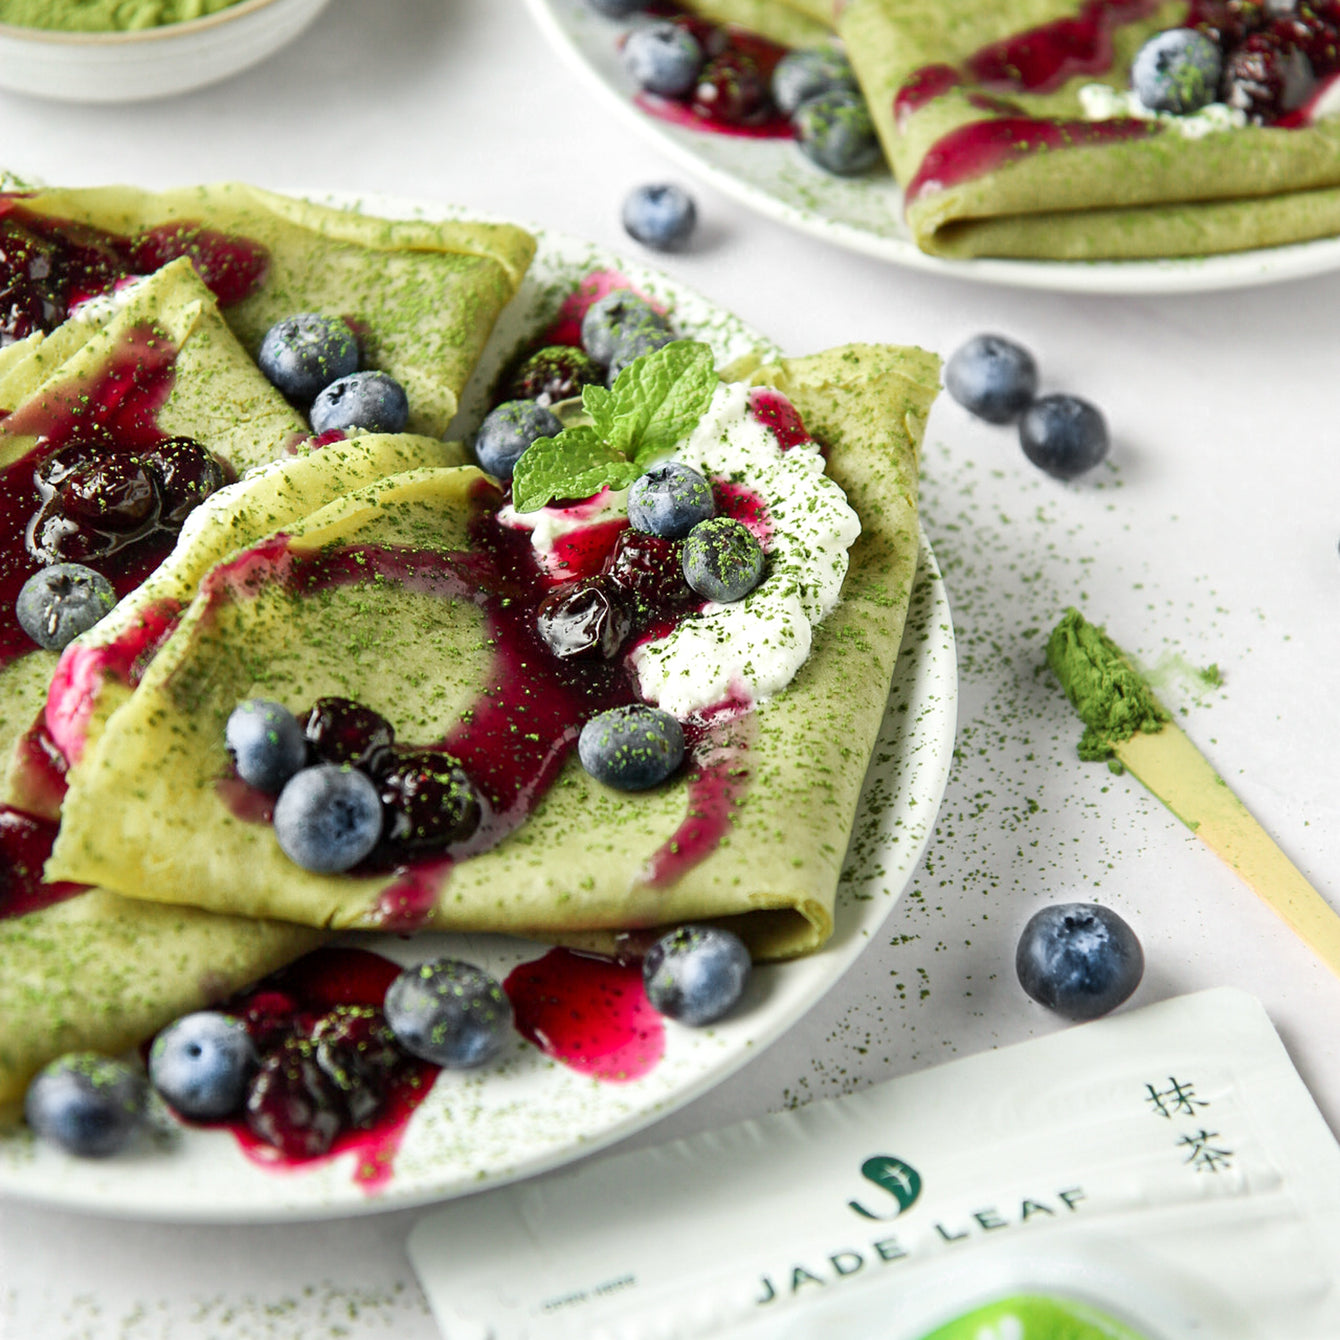 Matcha Crepes with Blueberry Sauce